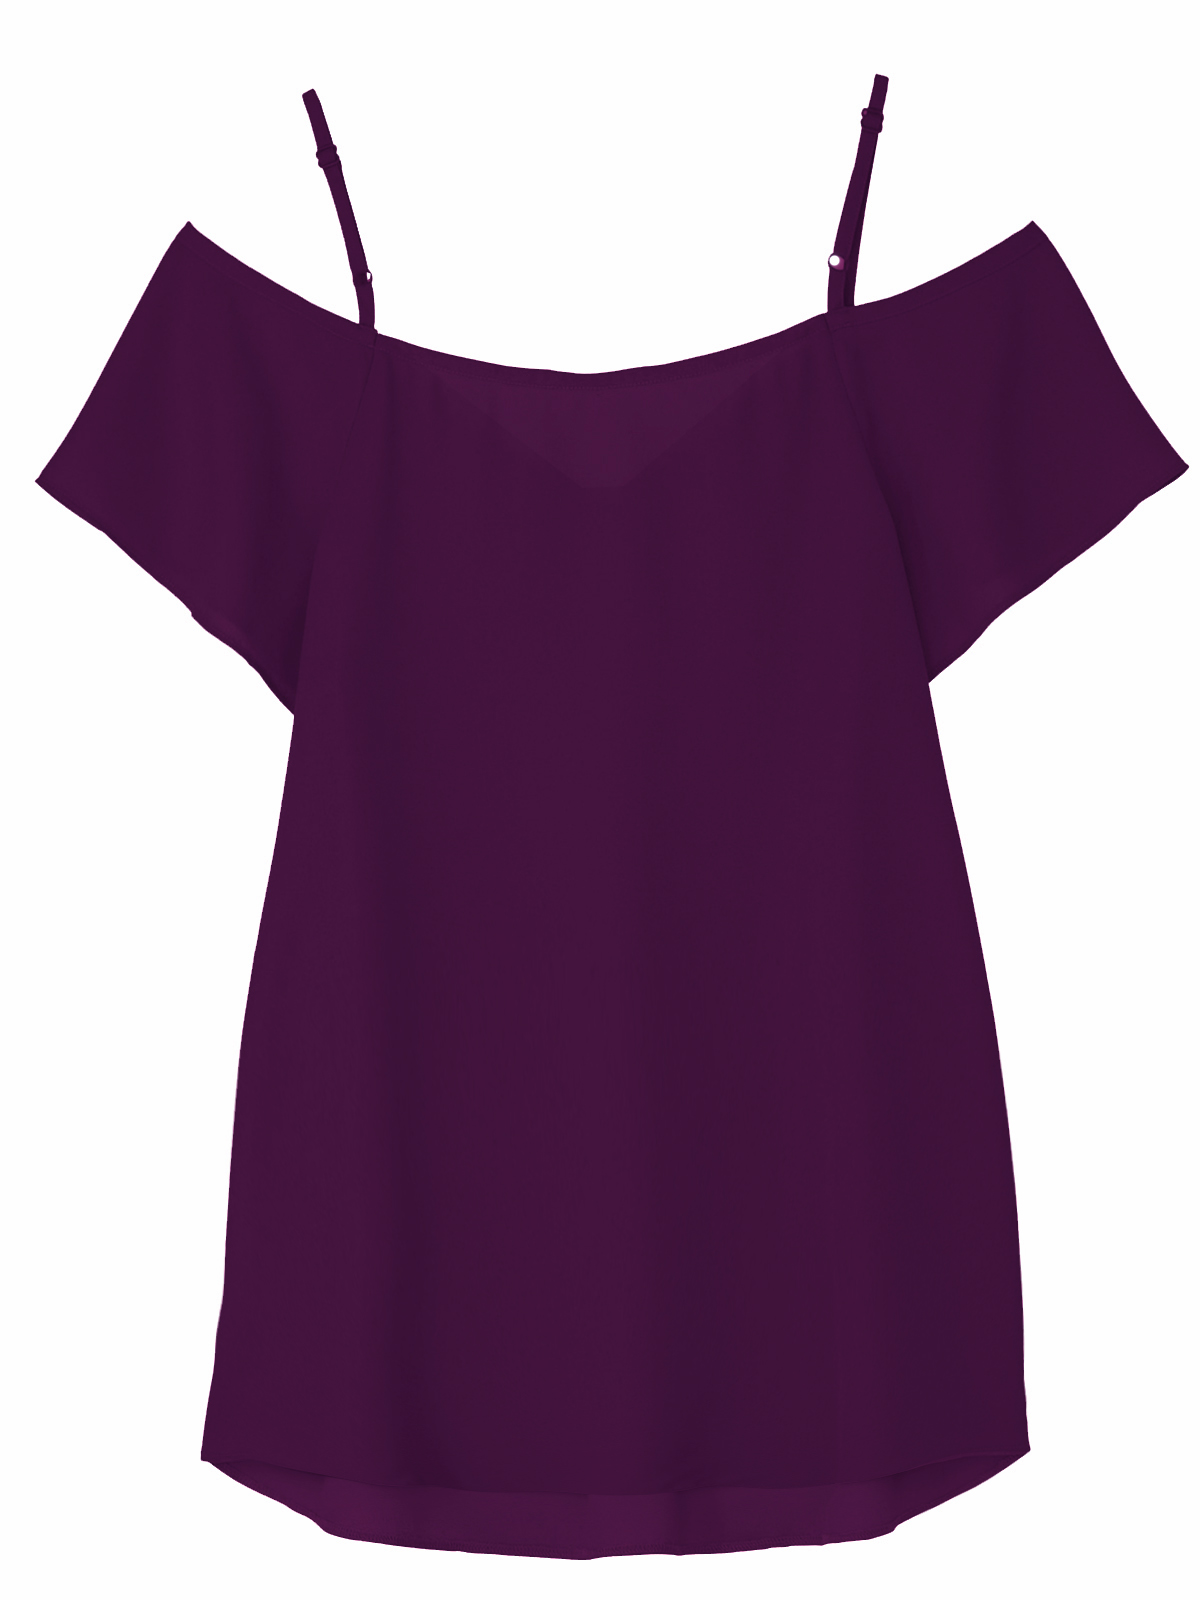 Plus Size wholesale clothing by simply be - - SimplyBe PLUM Strappy Off ...